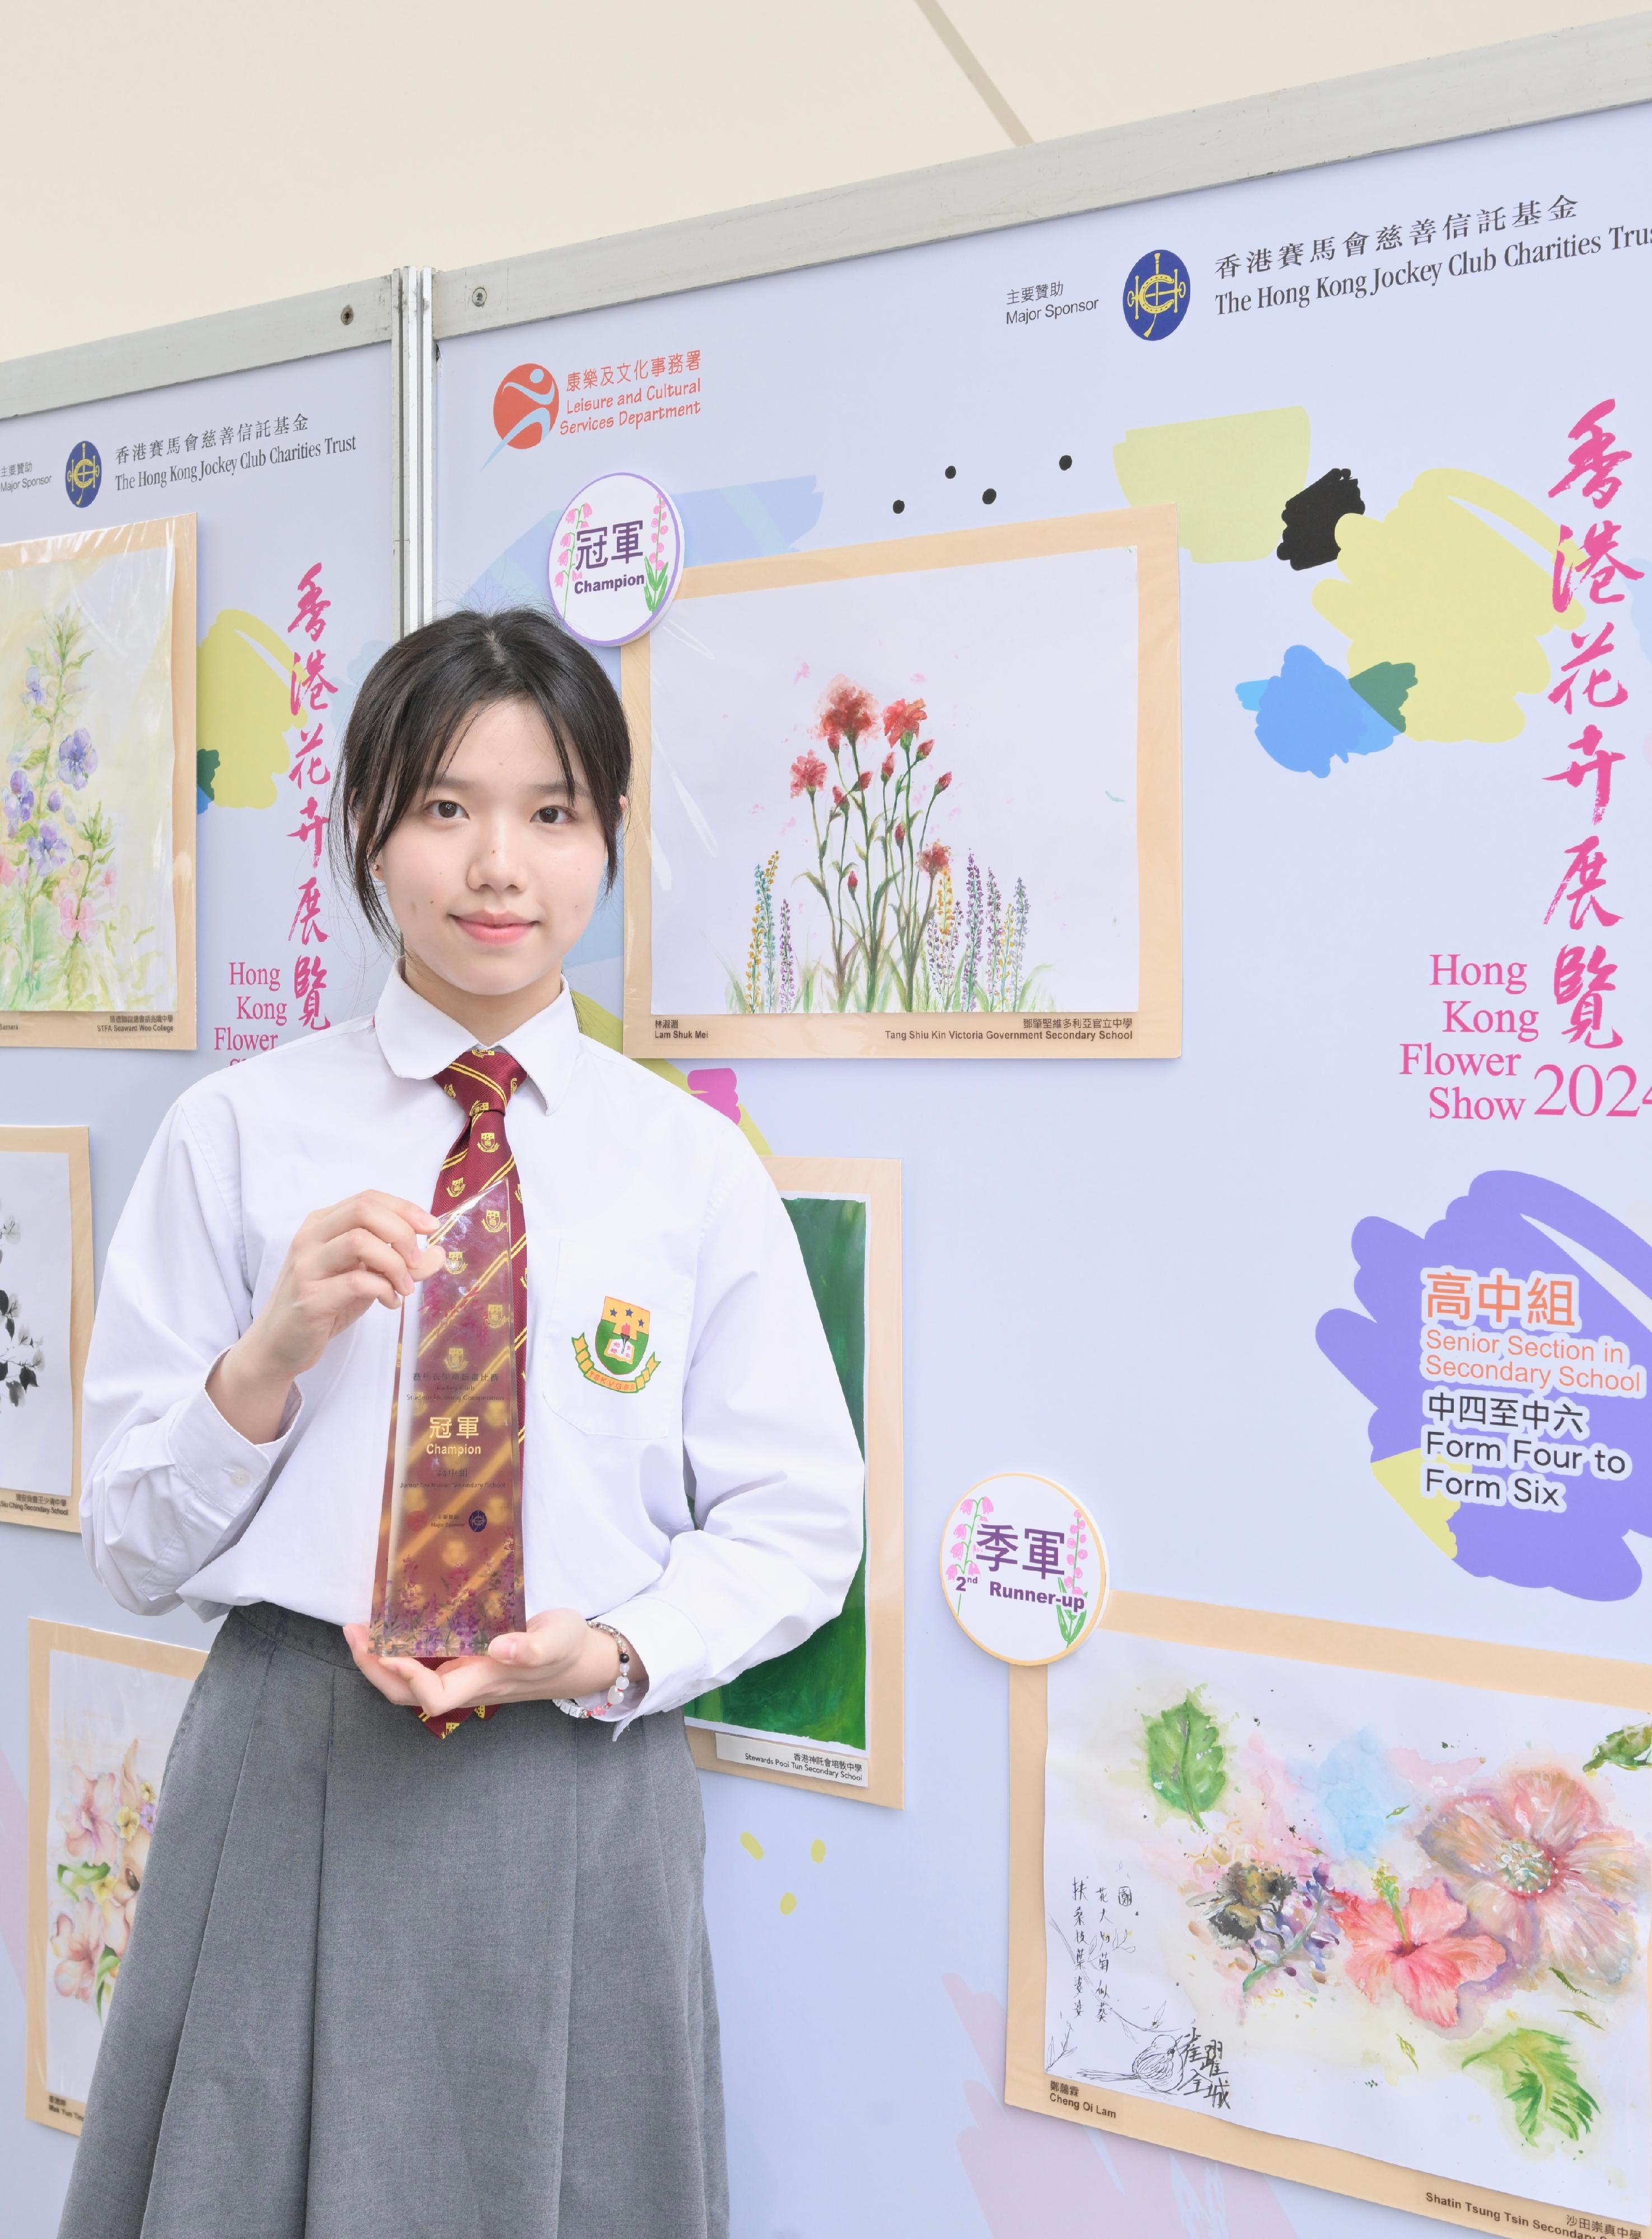 The Hong Kong Flower Show at Victoria Park will close at 9pm tomorrow (March 24). During the show period, various recreational fringe activities have been held, among which the Jockey Club Student Drawing Competition held its prize presentation ceremony today (March 23). Winning entries are now on display at the showground. Photo shows the champion of the Senior Section in Secondary School, Lam Shuk-mei, and her work.
